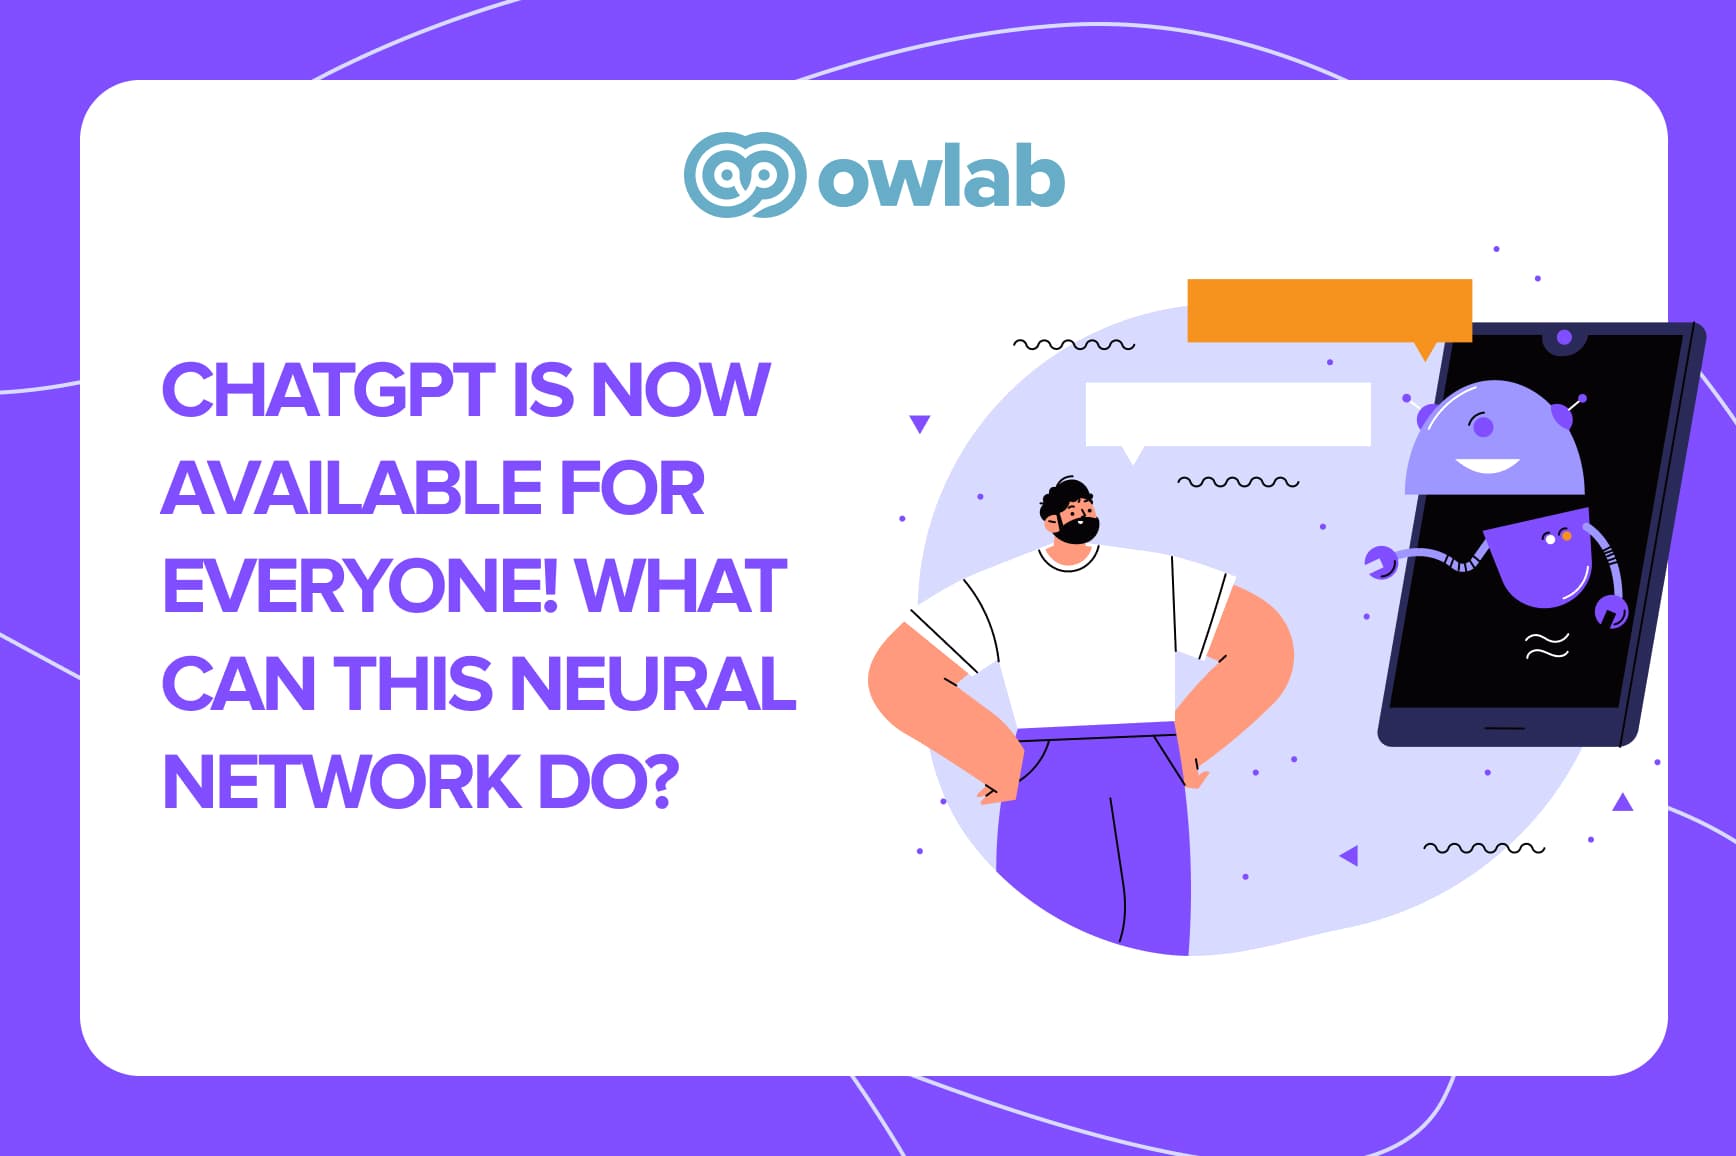 ChatGPT Is Now Available For Everyone! What Can This Neural Network Do?